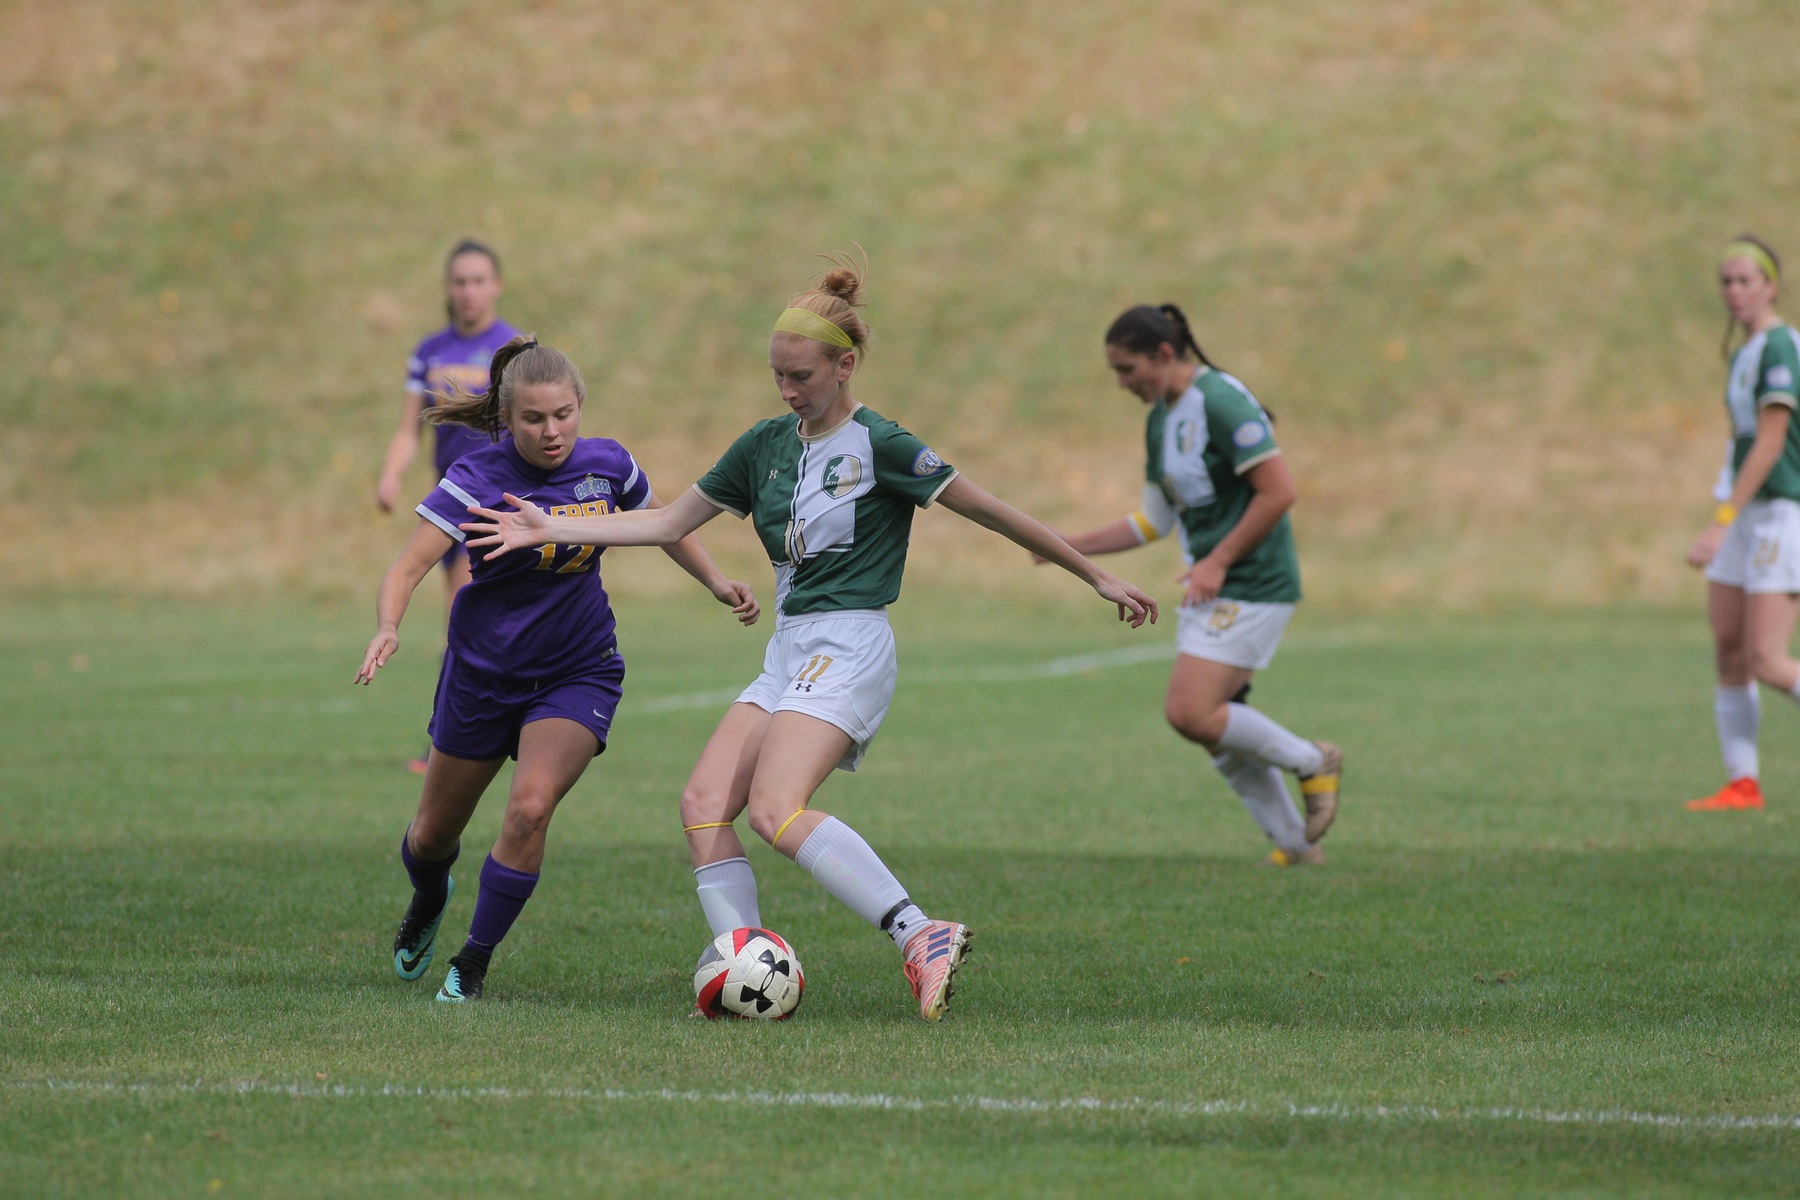 A Pair of Strikes From Chambers Lifts Bison to Victory over Lycoming